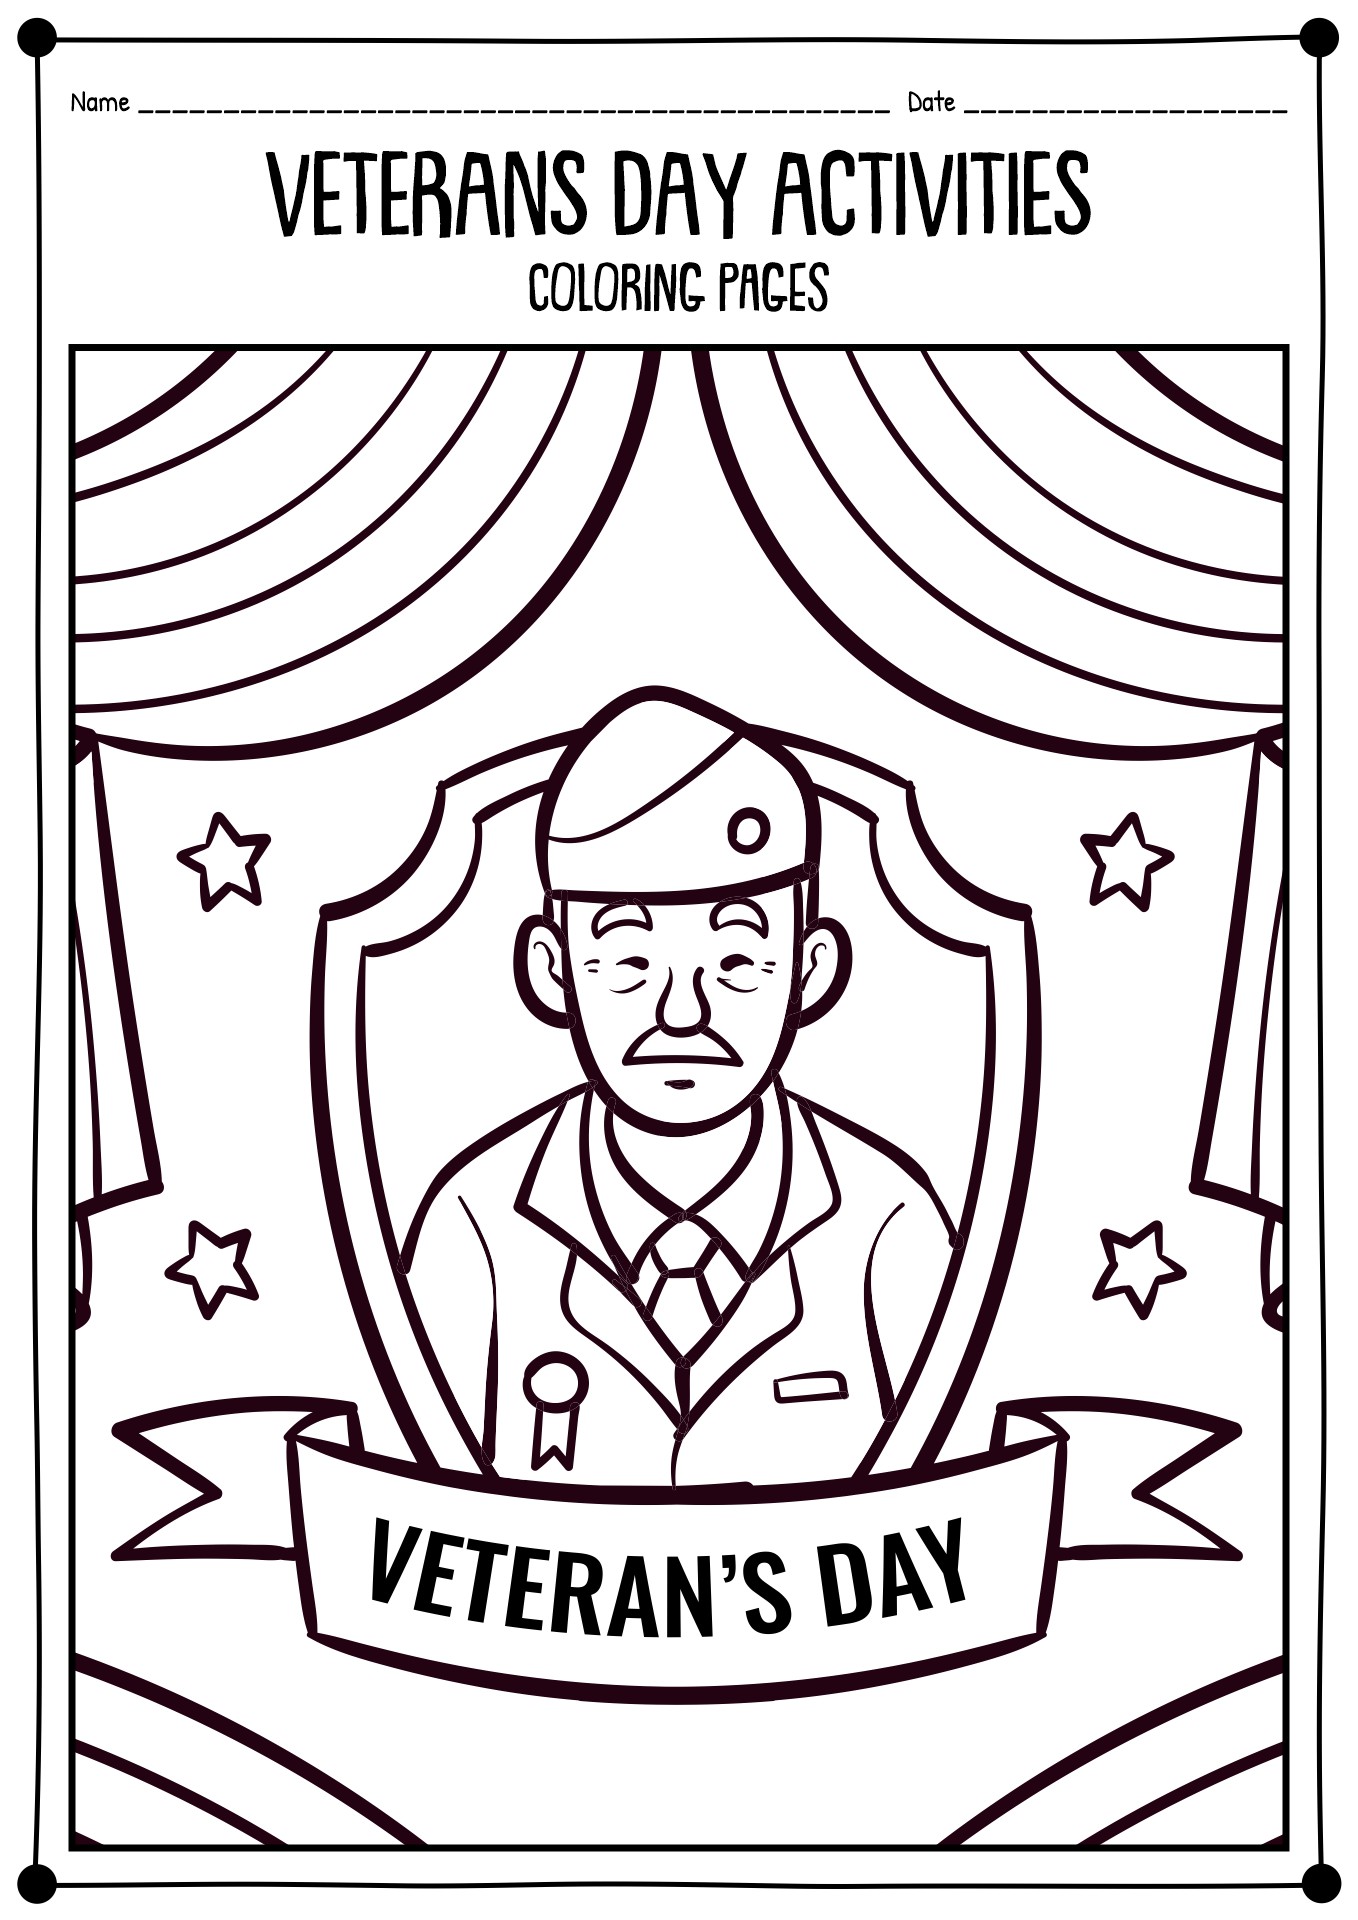 veterans-day-coloring-sheets-for-elementary-students